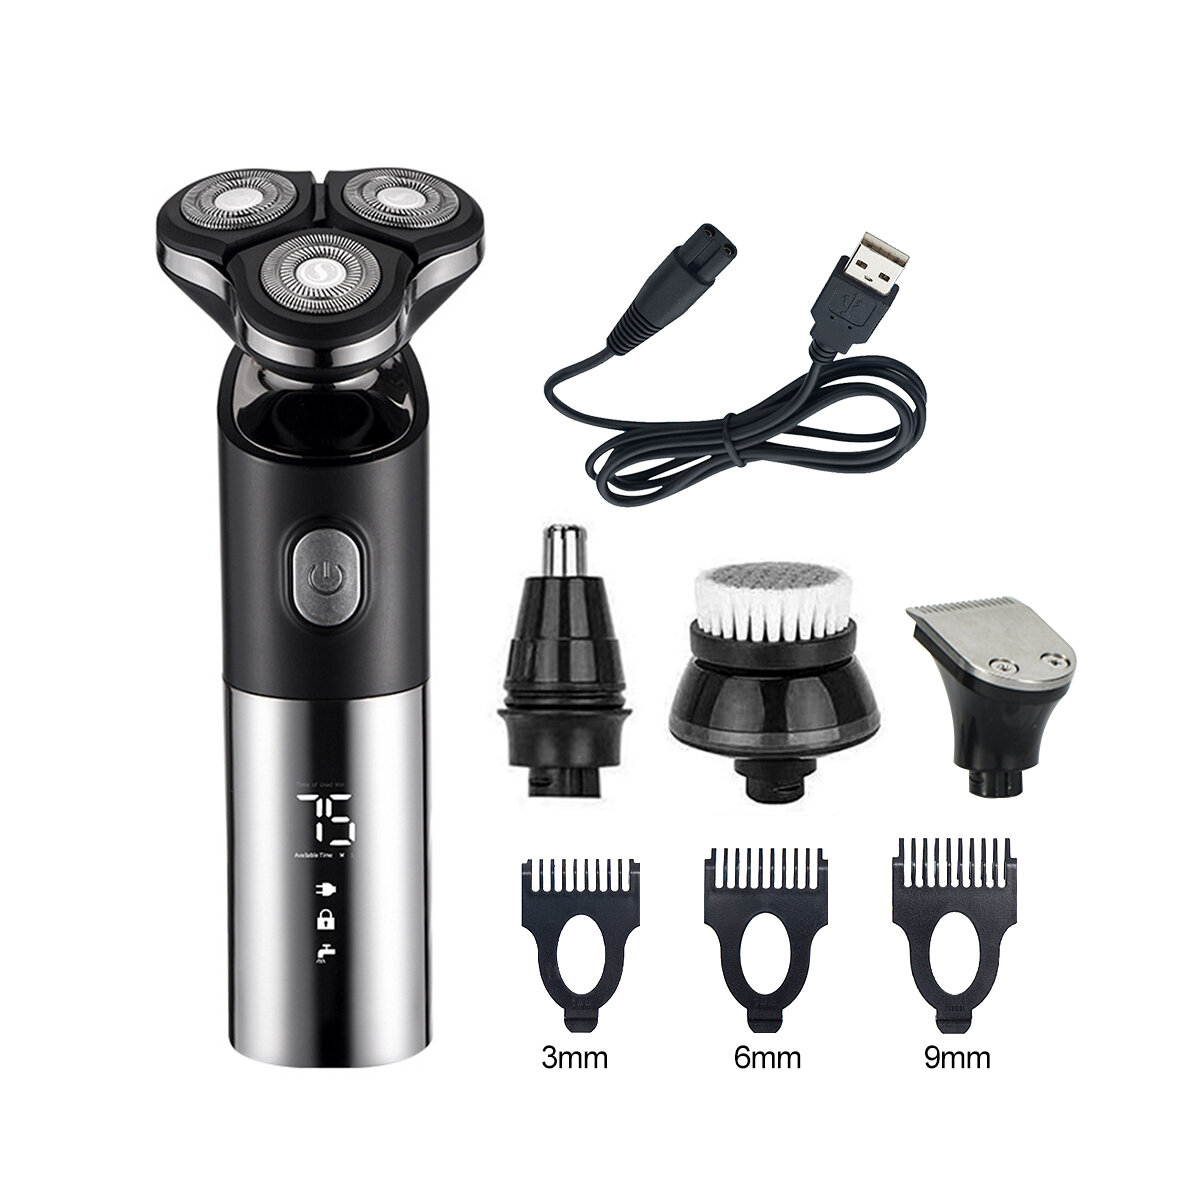 Professional Men's Rechargeable Electric Hair Shaver Multifunctional 4 In 1 Shaver Razor